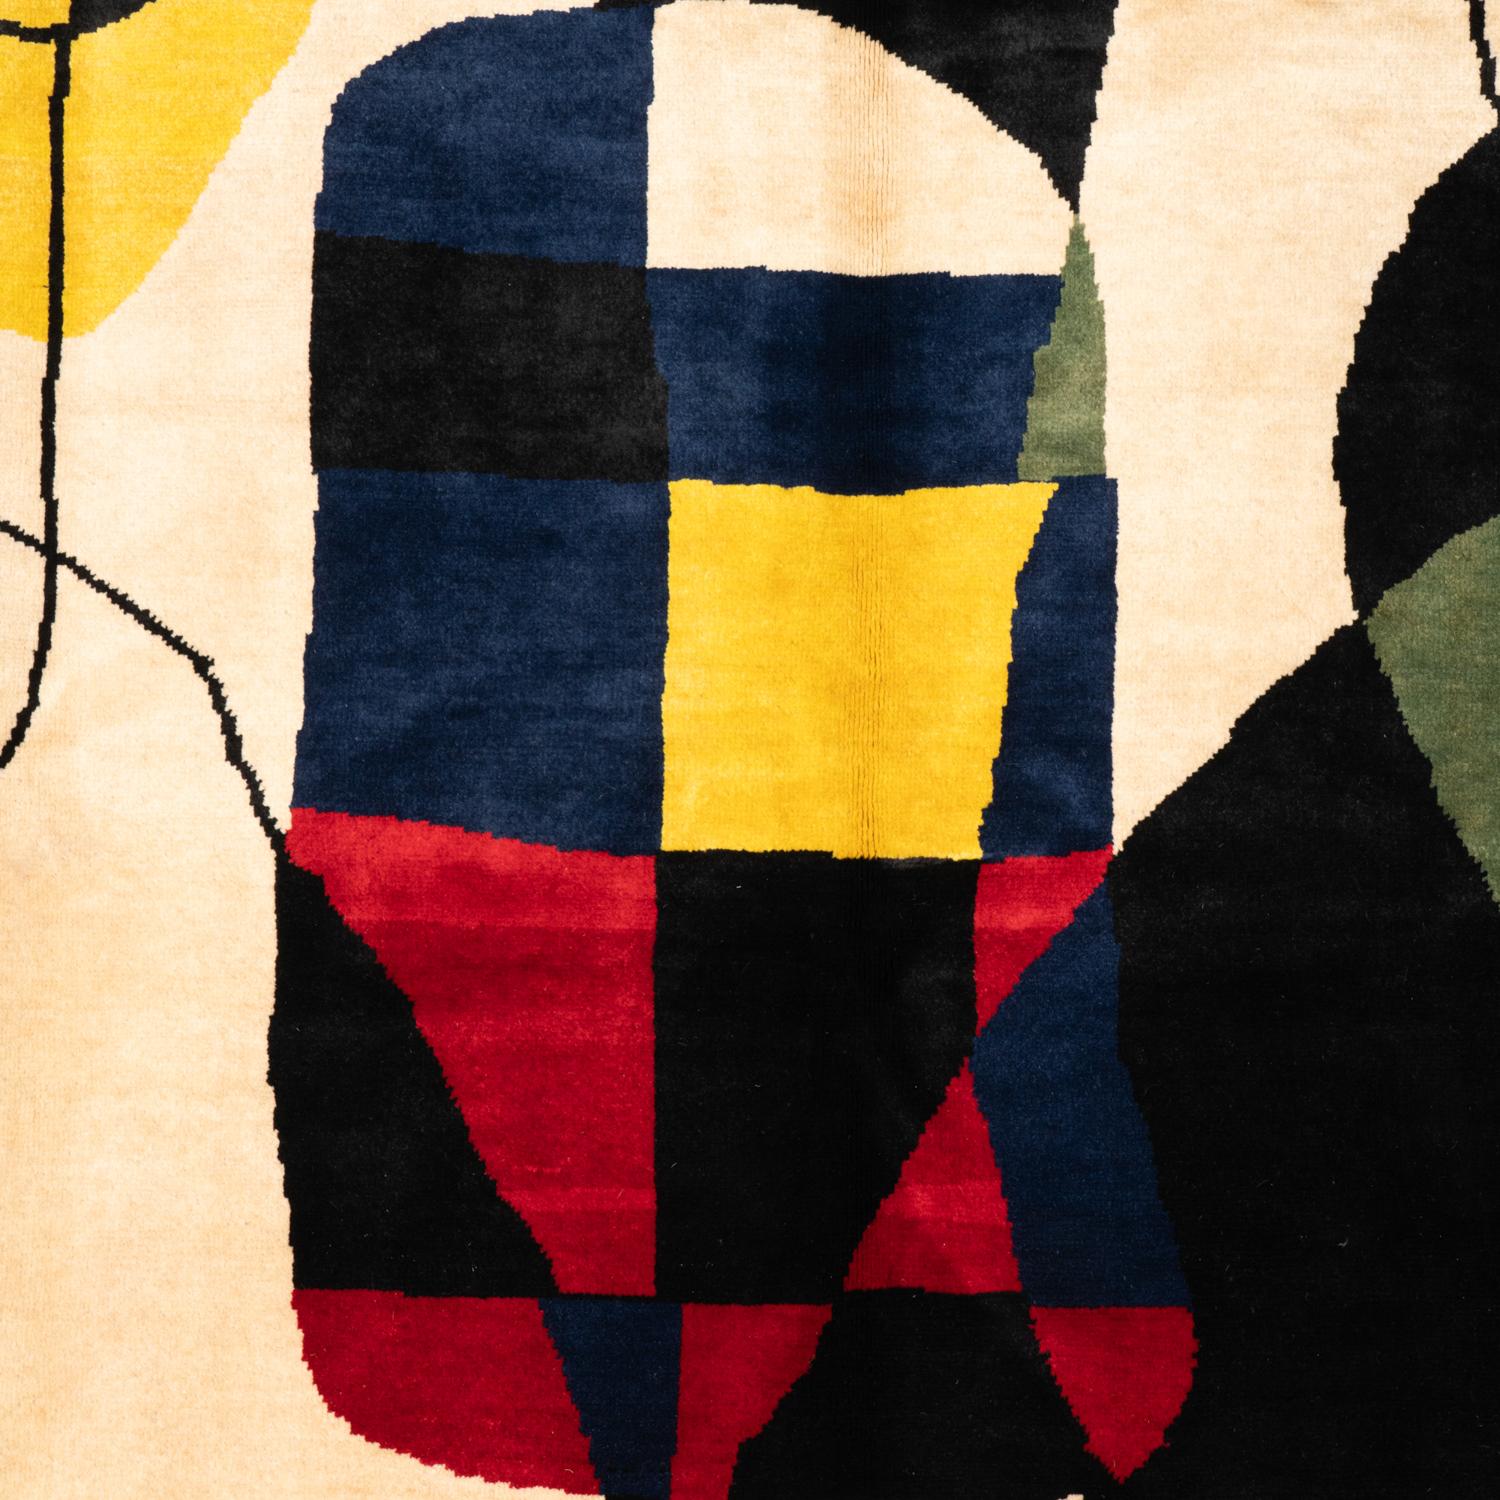 Rug, or tapestry, inspired by Joan Miro, in black, yellow and red tones on a beige background, suggesting characters and representing abstract shapes. Hand-knotted and in Merino wool.

Contemporary work of craftsmen.

On command. Will be numbered